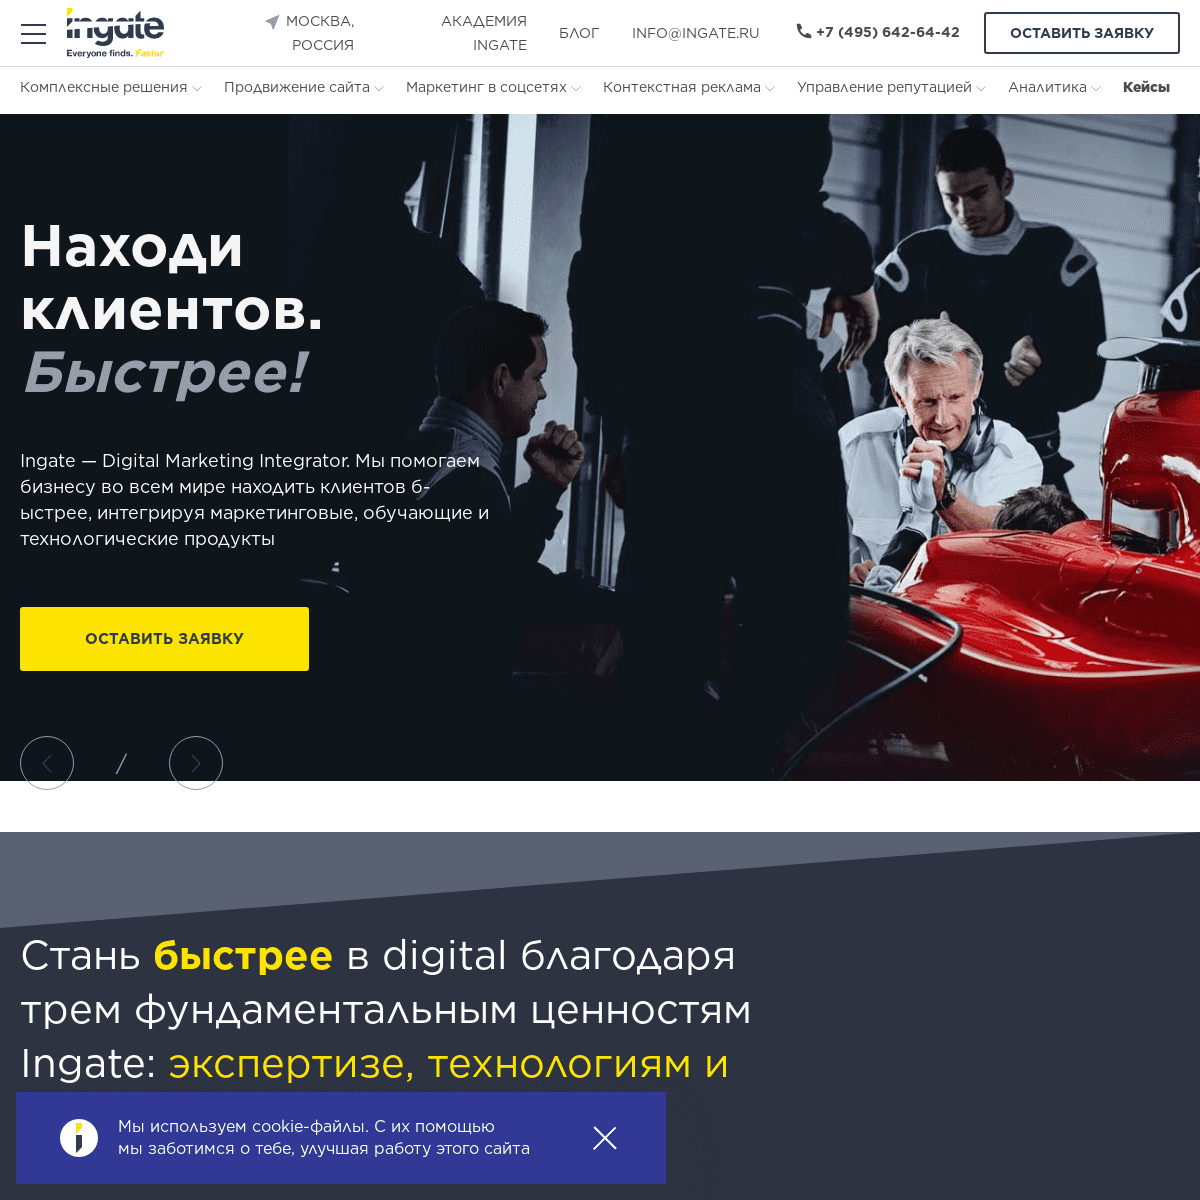 A complete backup of https://ingate.ru